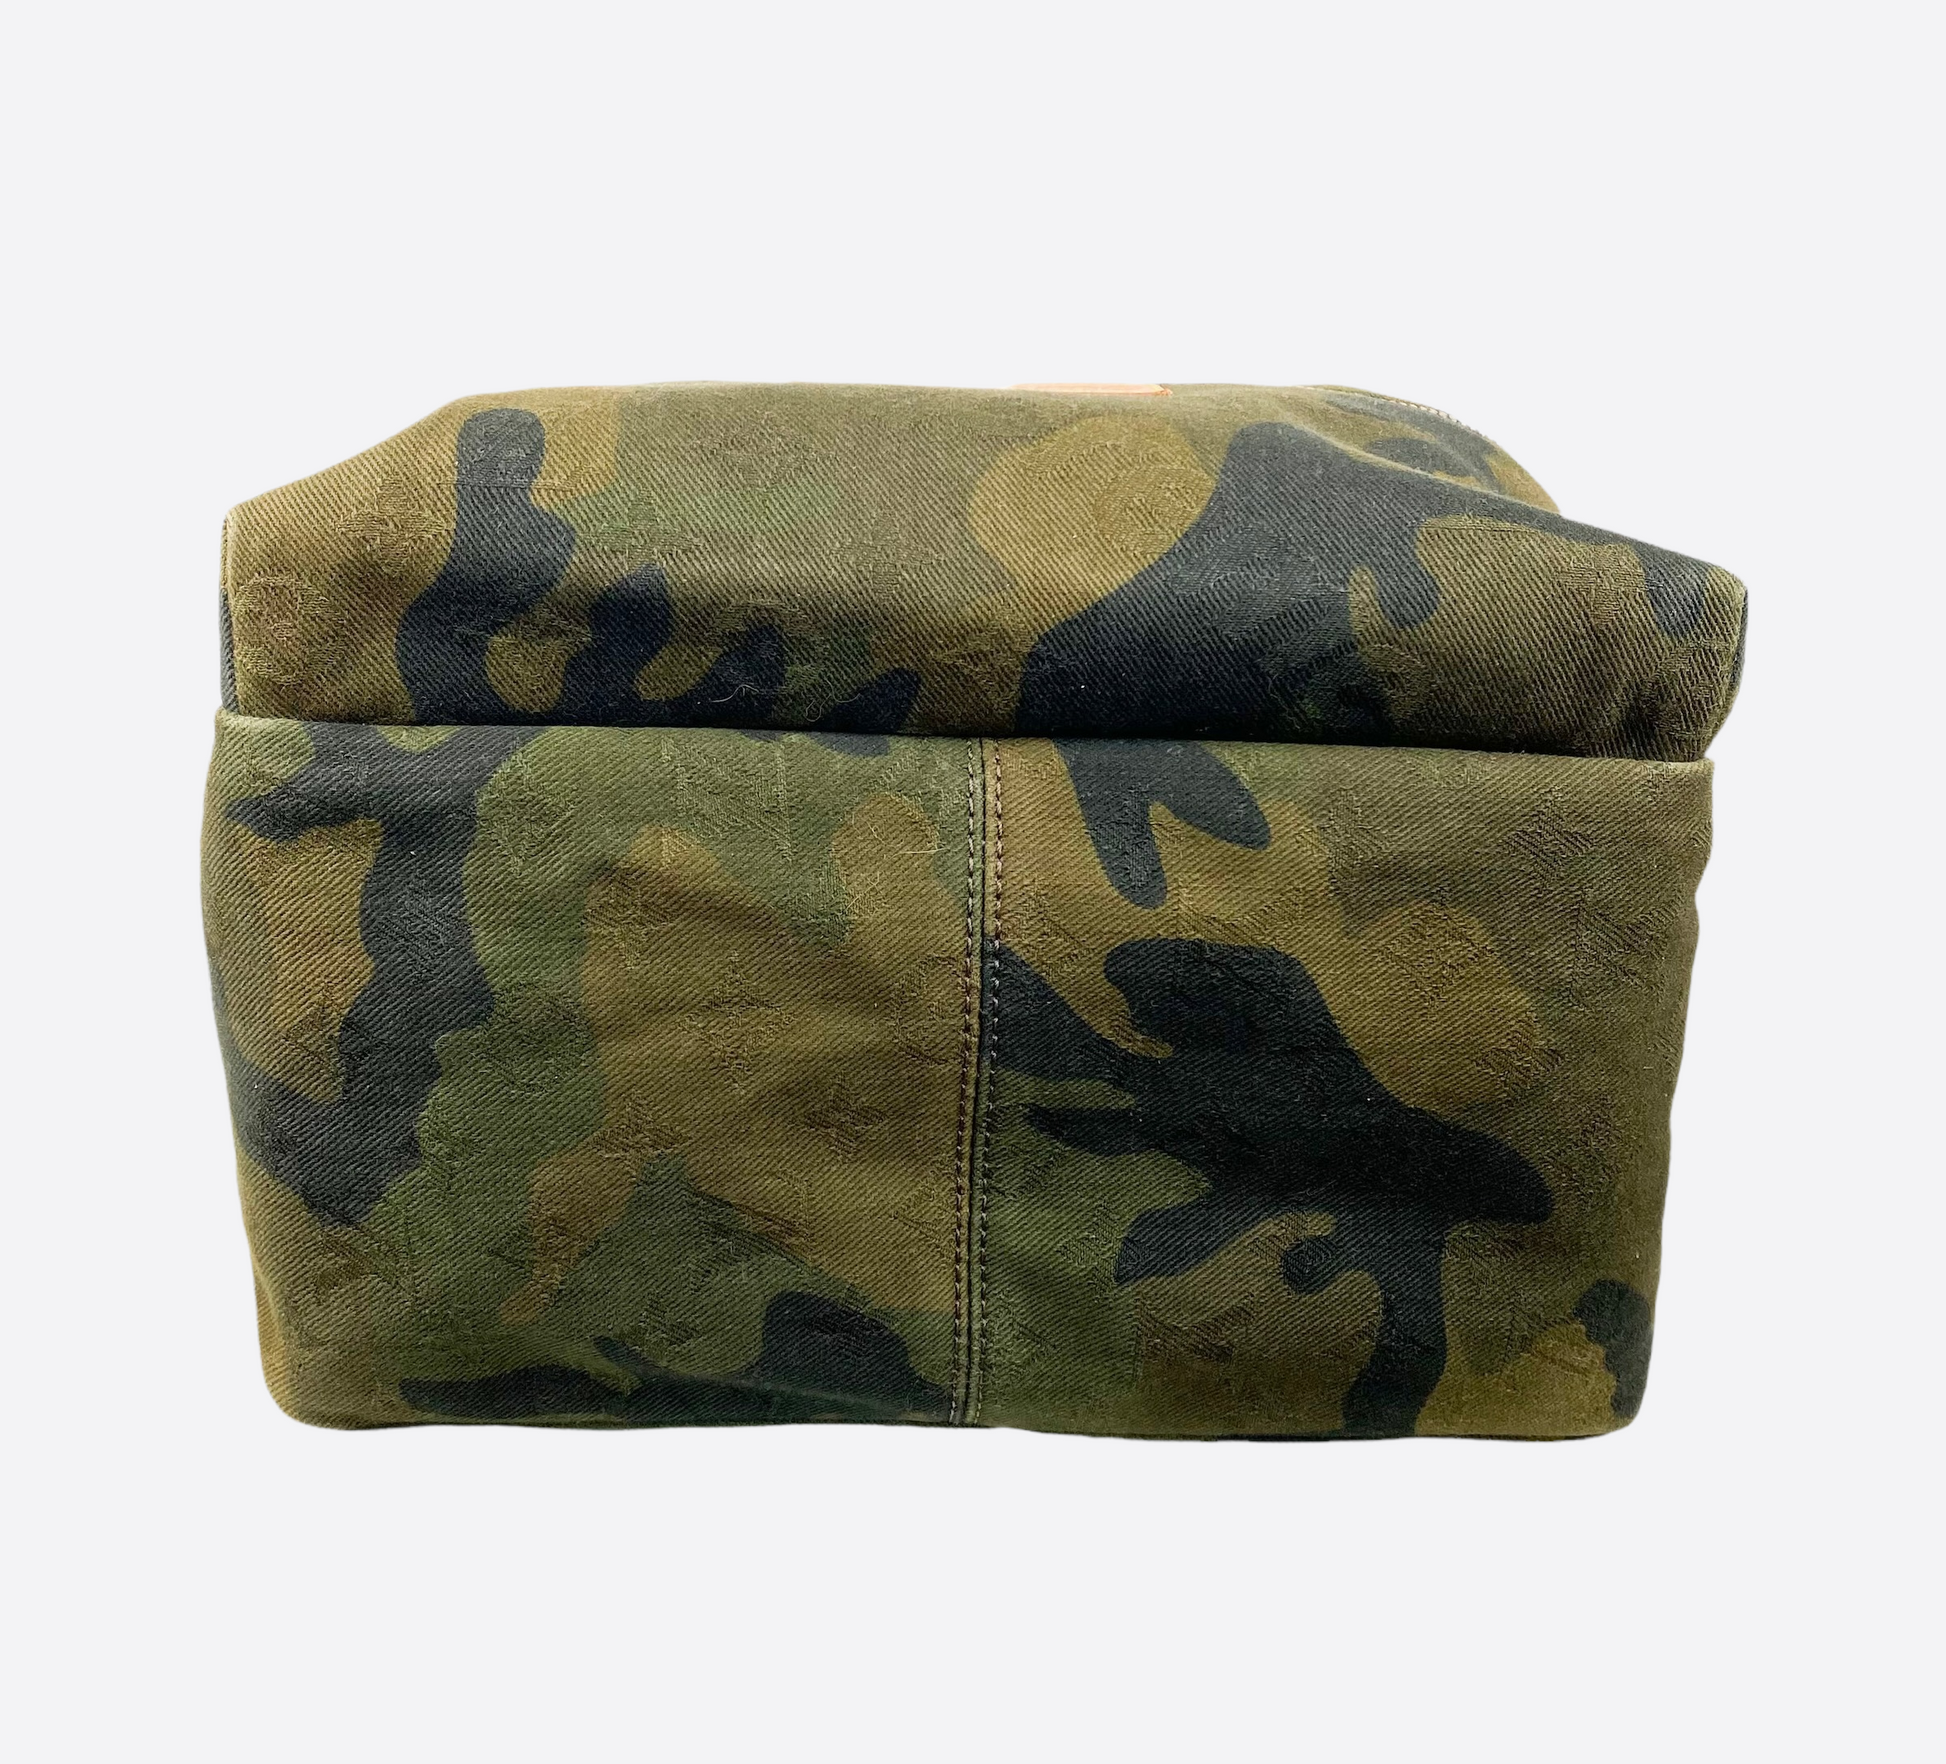 Louis Vuitton x Supreme Camouflage Apollo Nano Backpack of Canvas,  Leather and Gold Tone Hardware, Handbags and Accessories Online, 2019